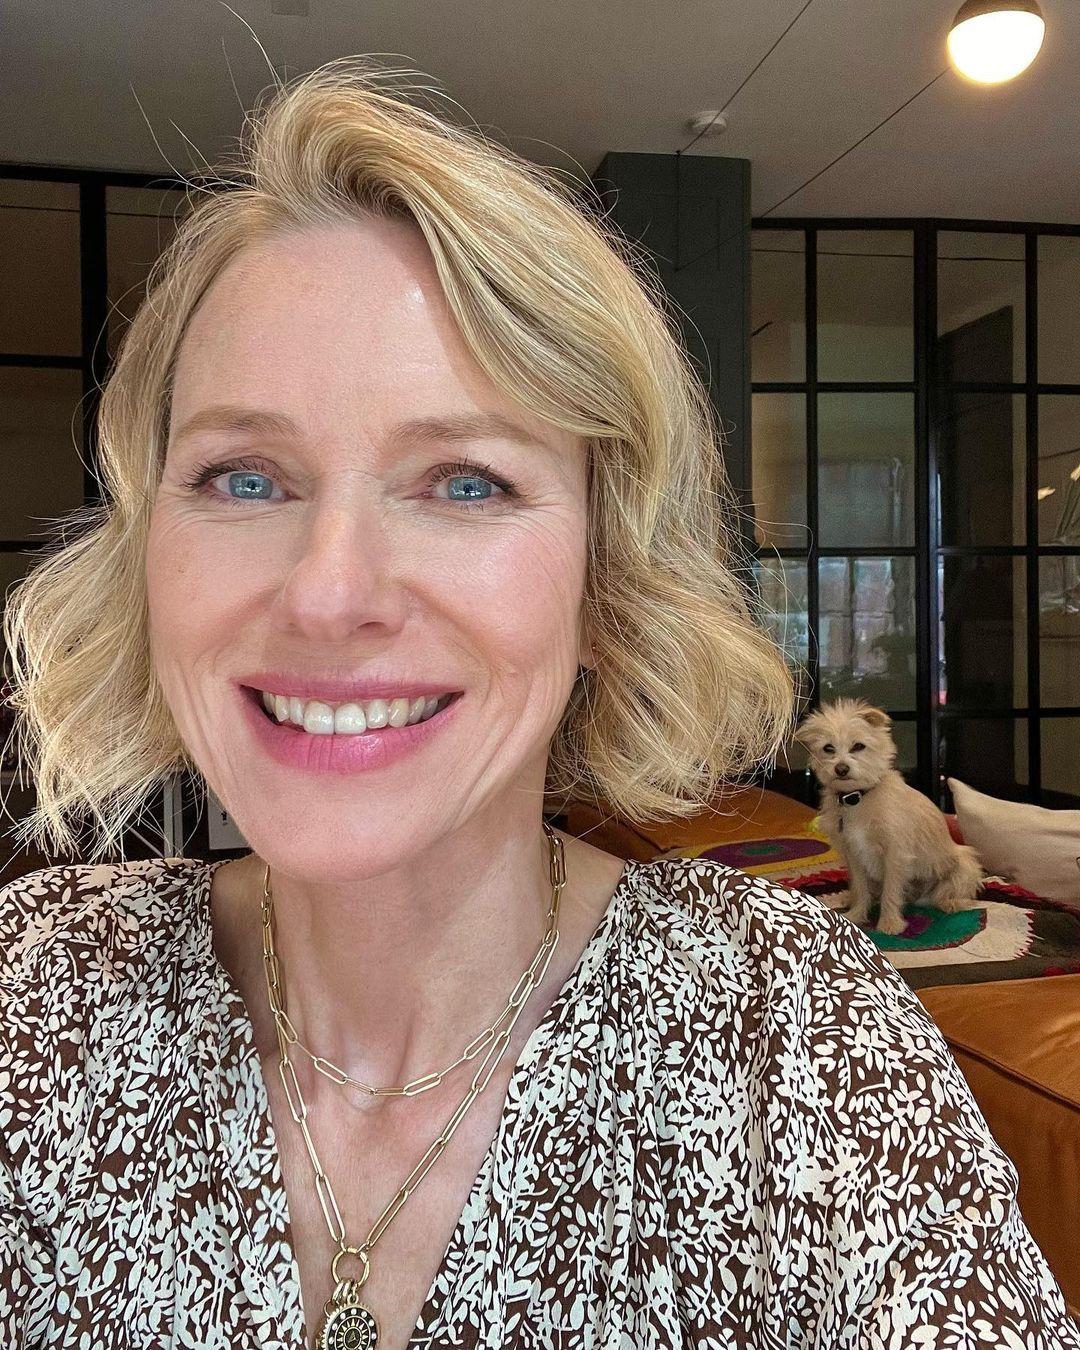 Naomi Watts wants to fix dry January for menopausal women, with lube!